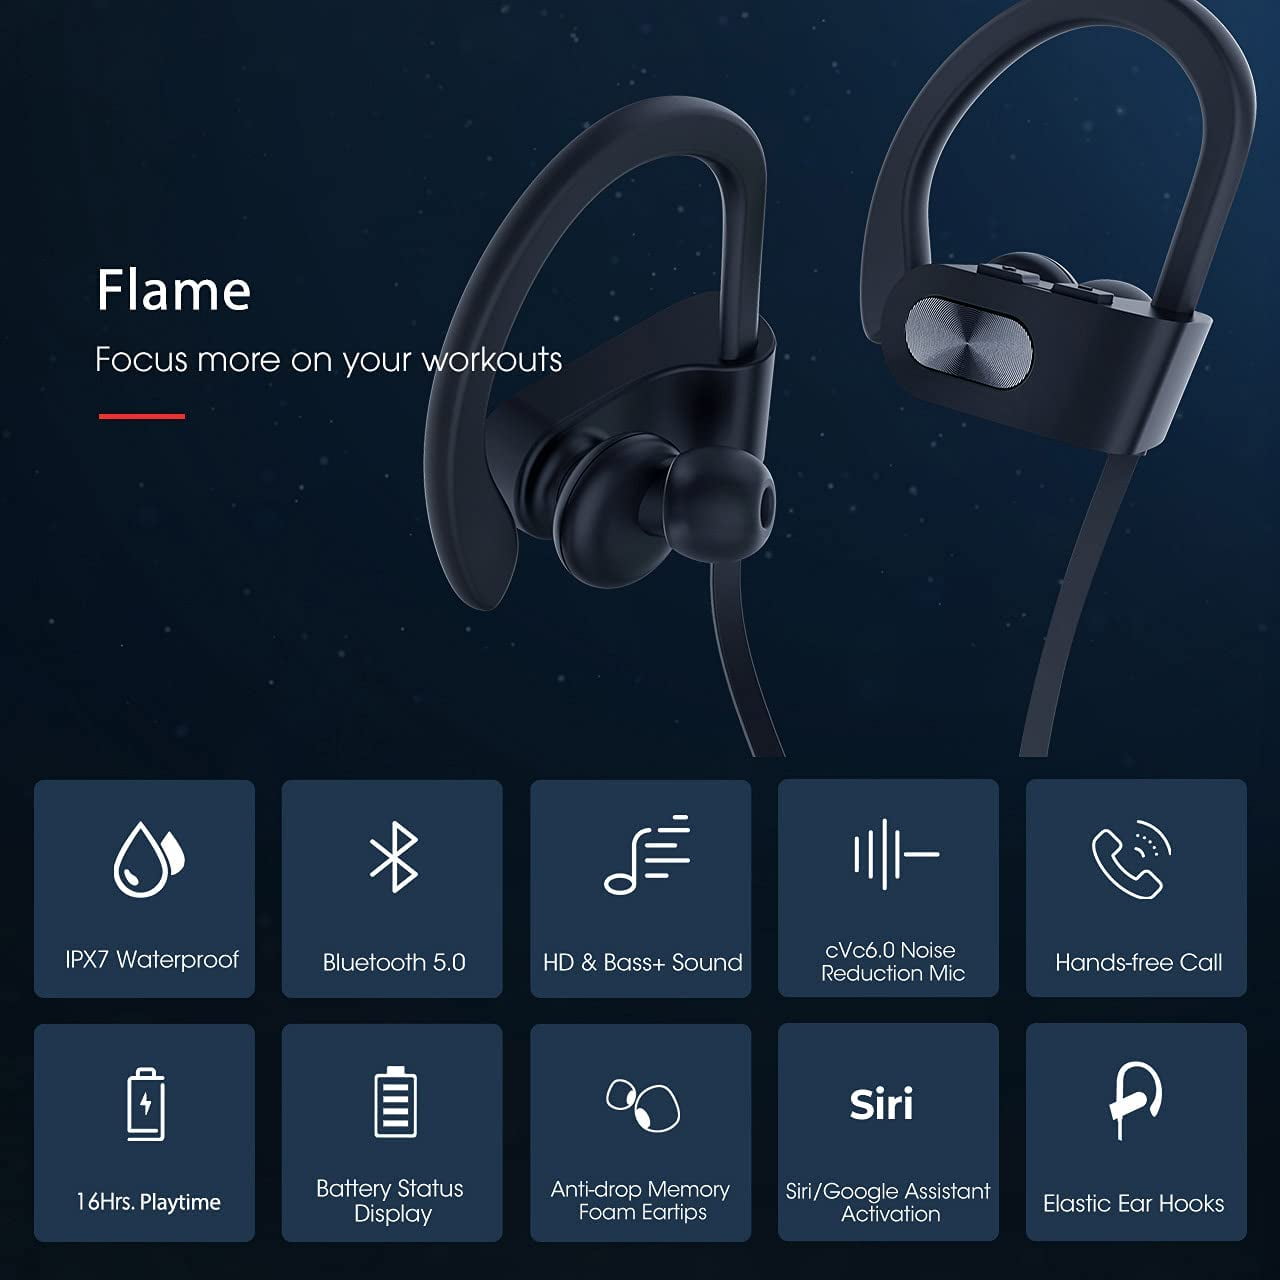 Flame Running Headphones w/16 Hrs Playtime Gym w/CVC6.0 Noise Cancelling Mic Bass+ HD Stereo Wireless Sports Earphones w/IPX7 Waterproof Earbuds in Ear for Workout Bluetooth Headphones V5.0 